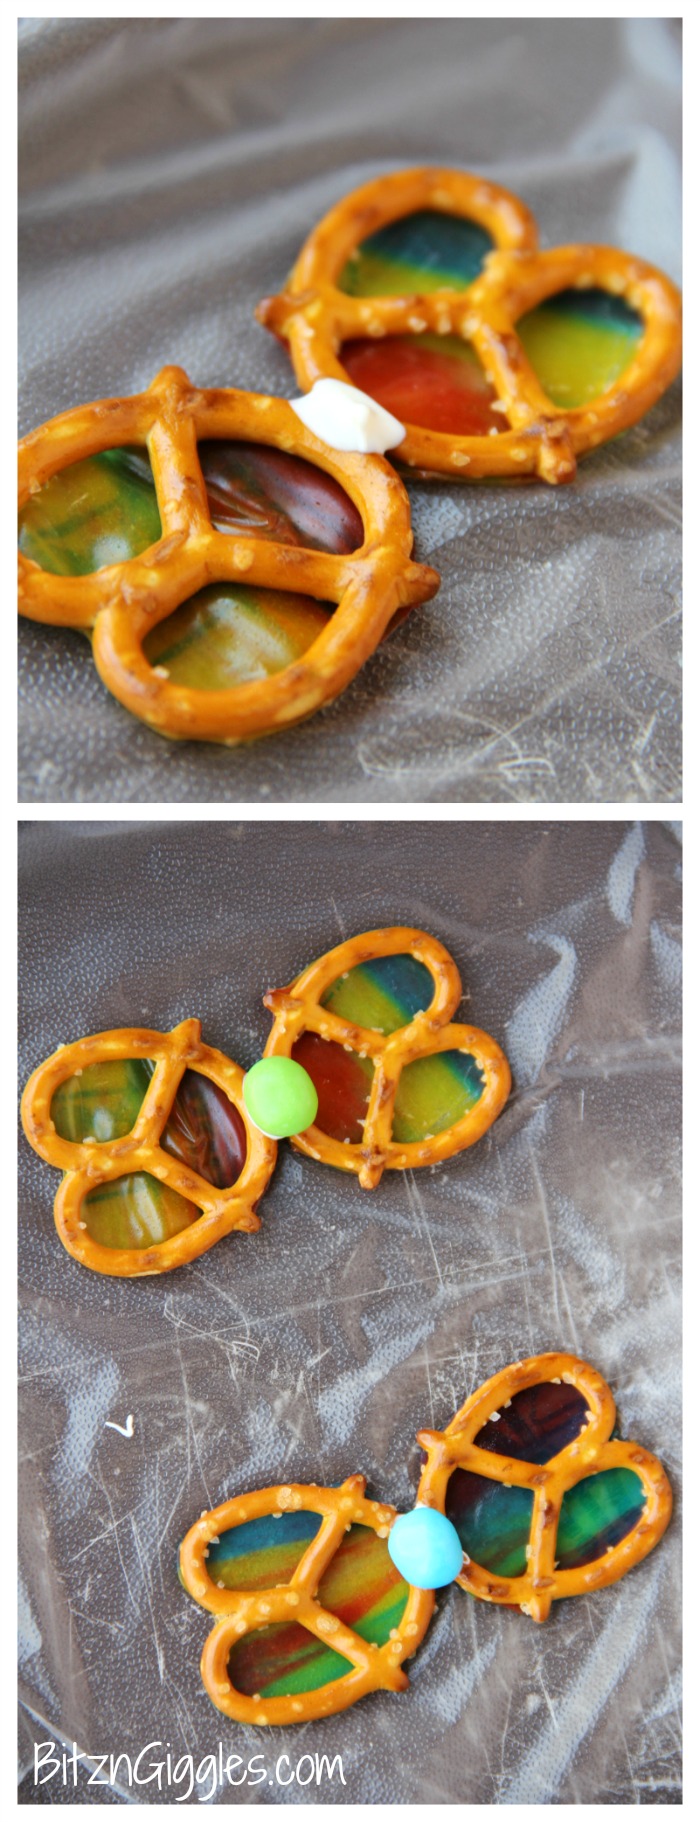 Pretzel Butterflies - 4-Ingredient beautiful butterflies to snack on! Rollups act as the colorful wings and give a gorgeous stained glass effect. So pretty when held up to the sun!